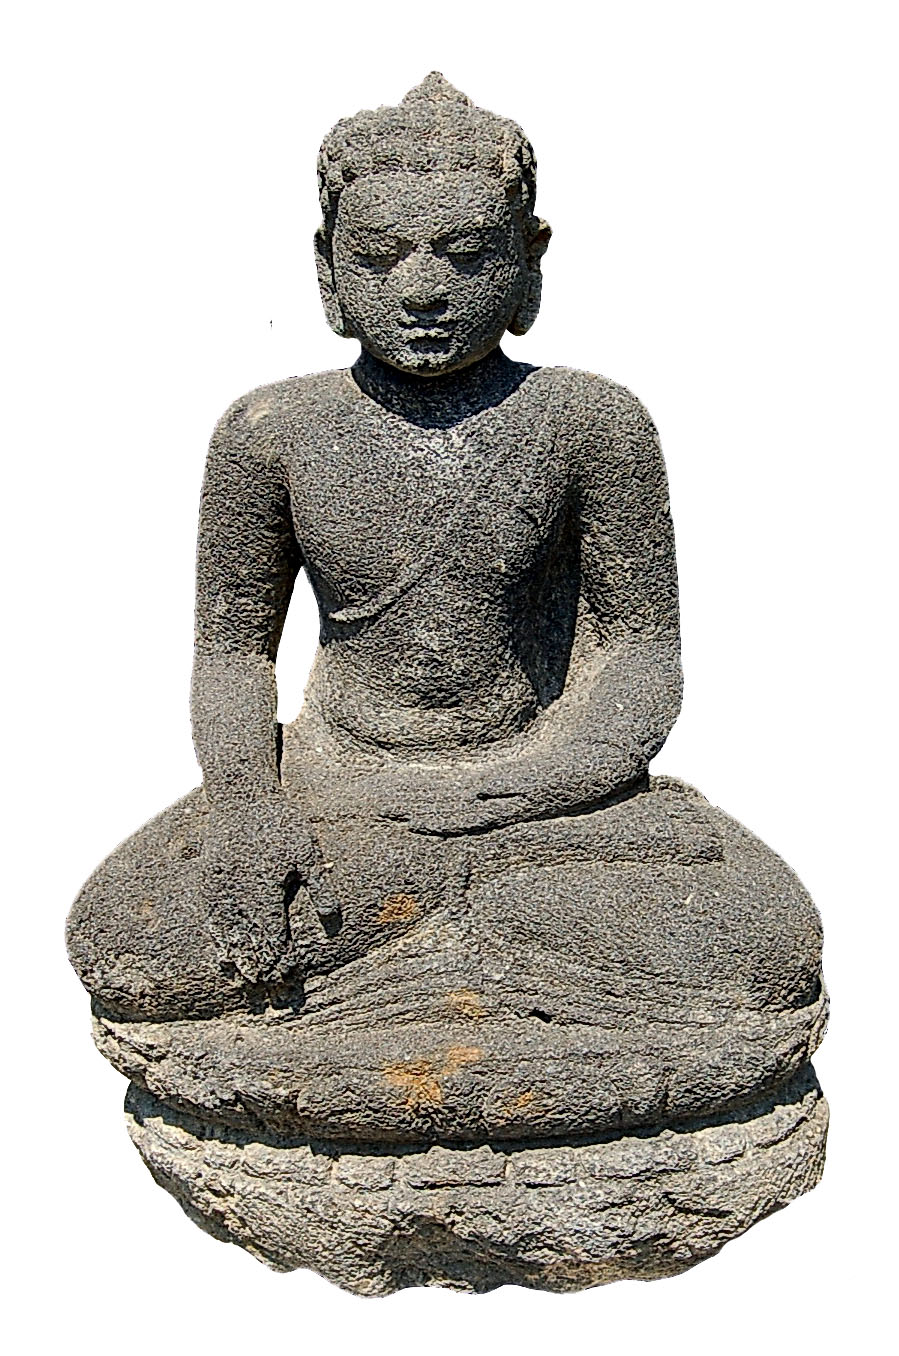 Read more about the article Arca Dhyani Buddha Aksobhya